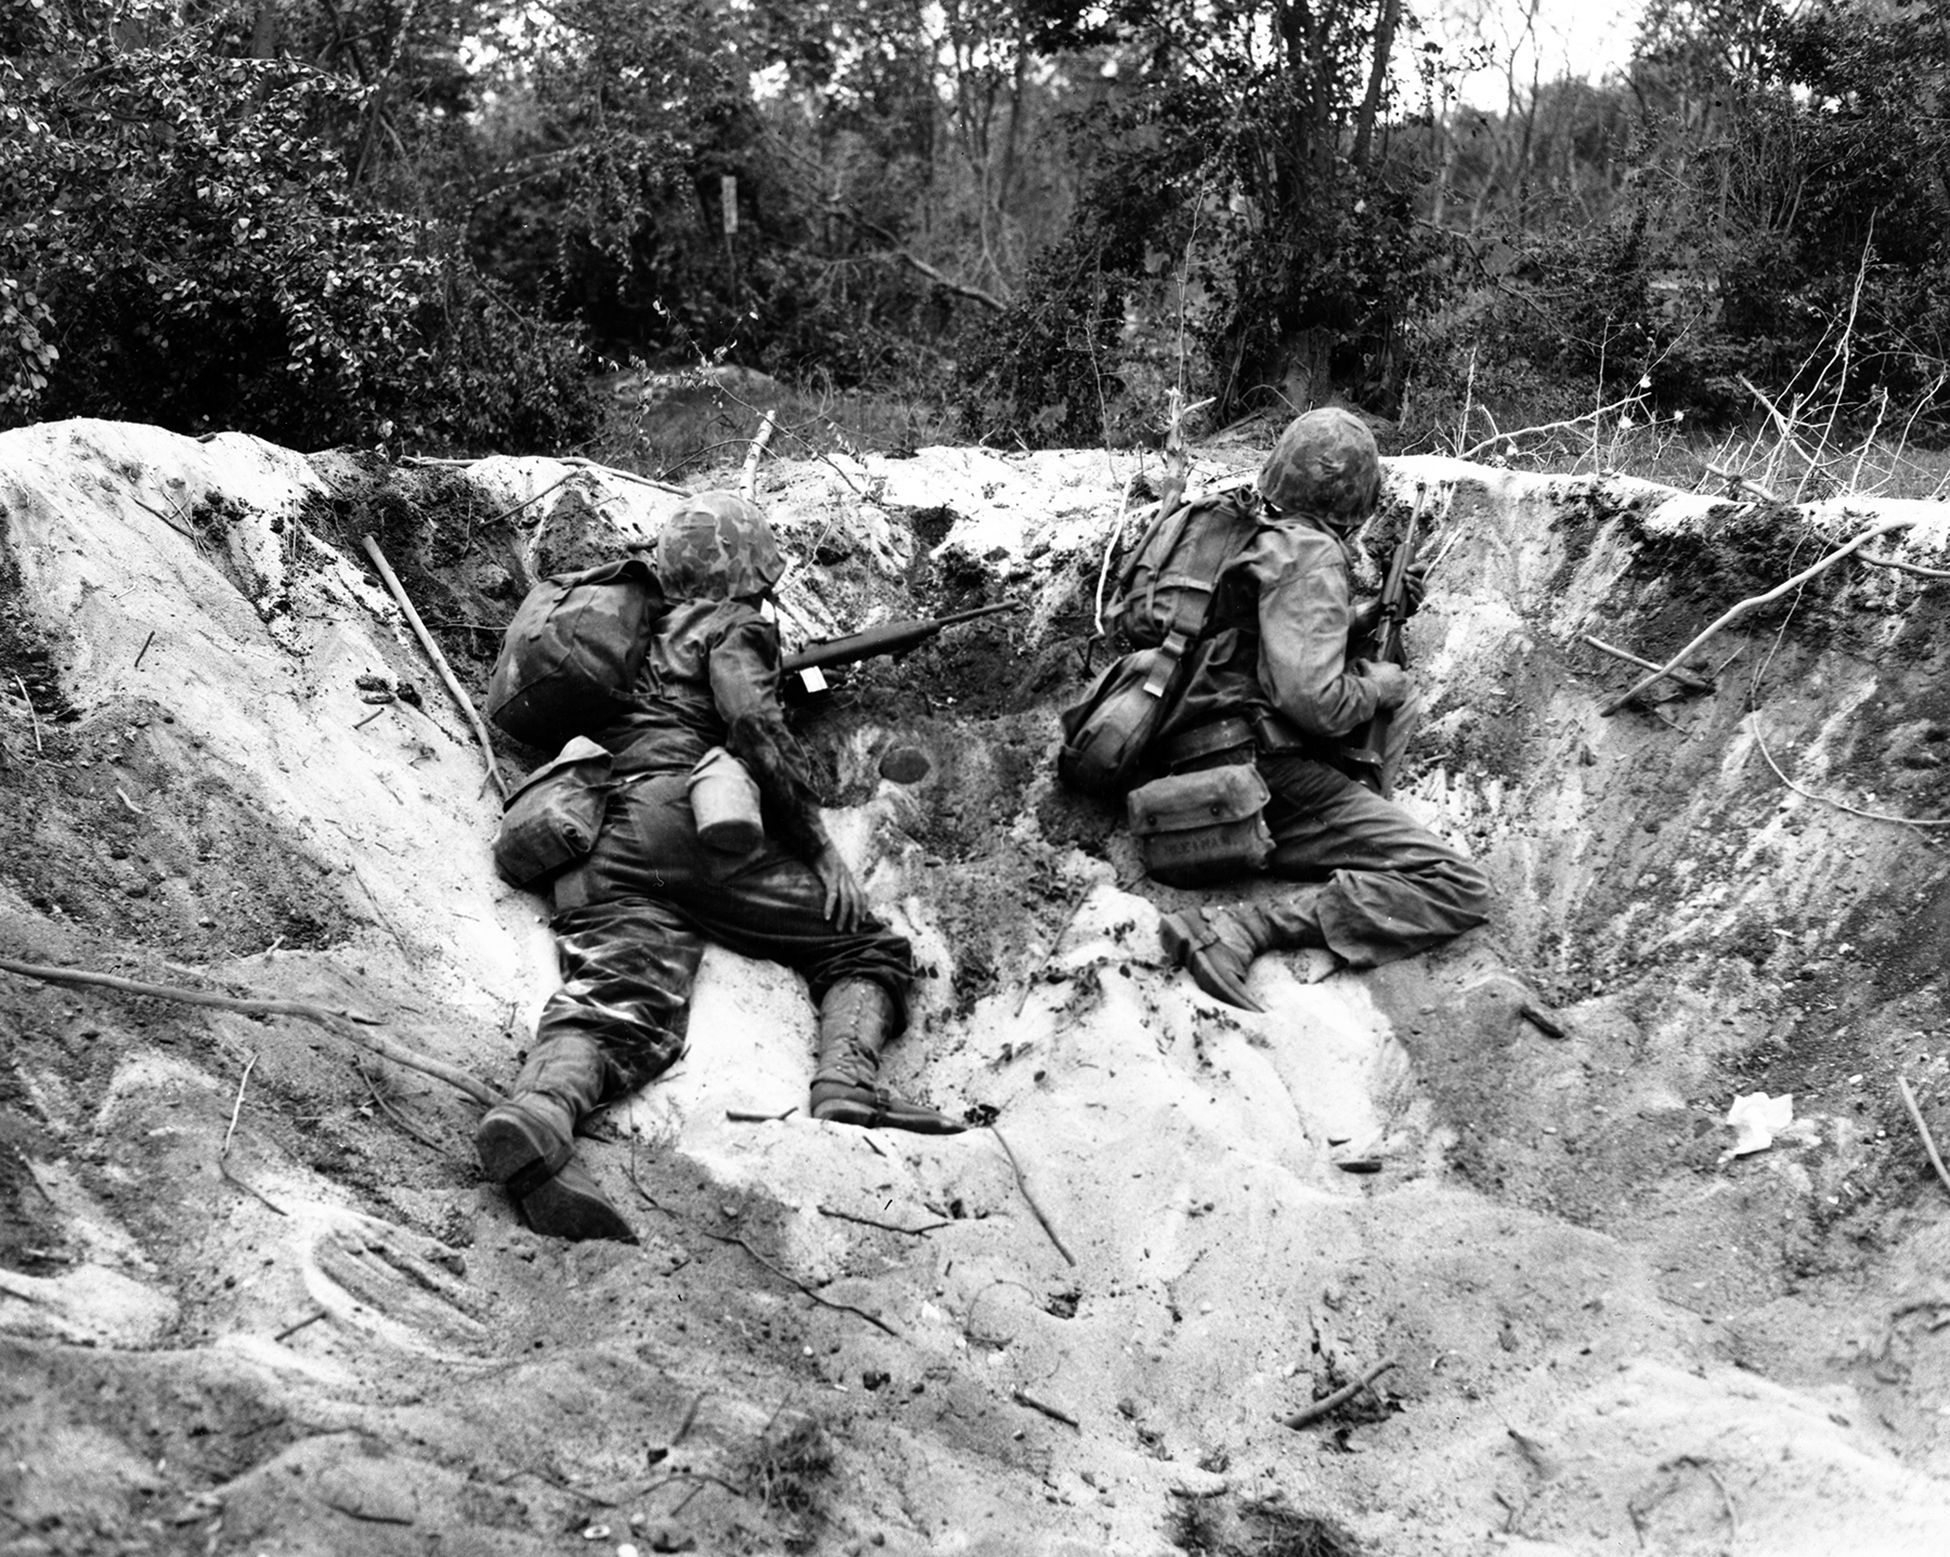 U.S. Marines in a shell hole search for snipers on the Pacific island of Saipan. Private Lee Marvin was wounded June 18, 1944, during the assault on the island’s highpoint, Mount Tapochau. “In 15 minutes, the company was reduced from 247 men to six,” Marvin recalled.